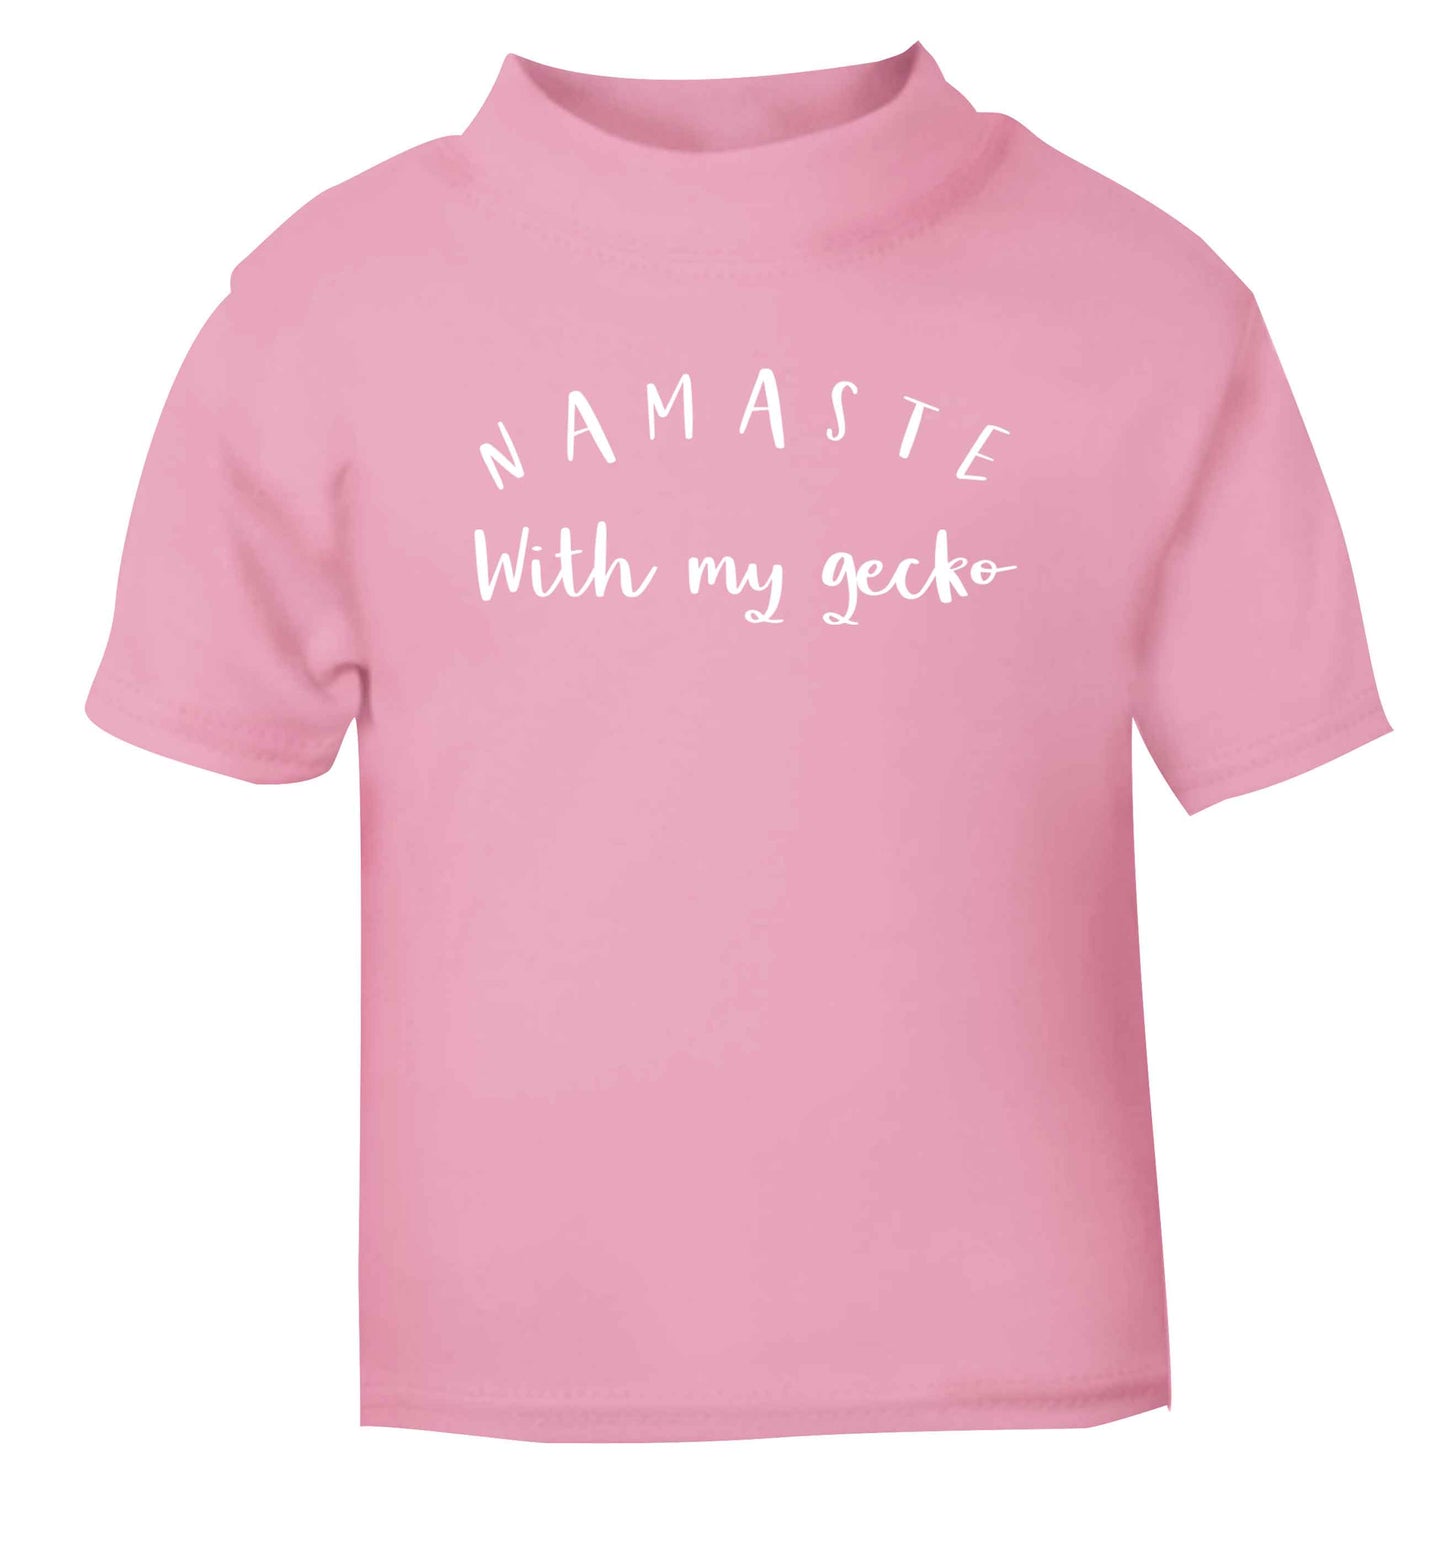 Namaste with my gecko light pink Baby Toddler Tshirt 2 Years